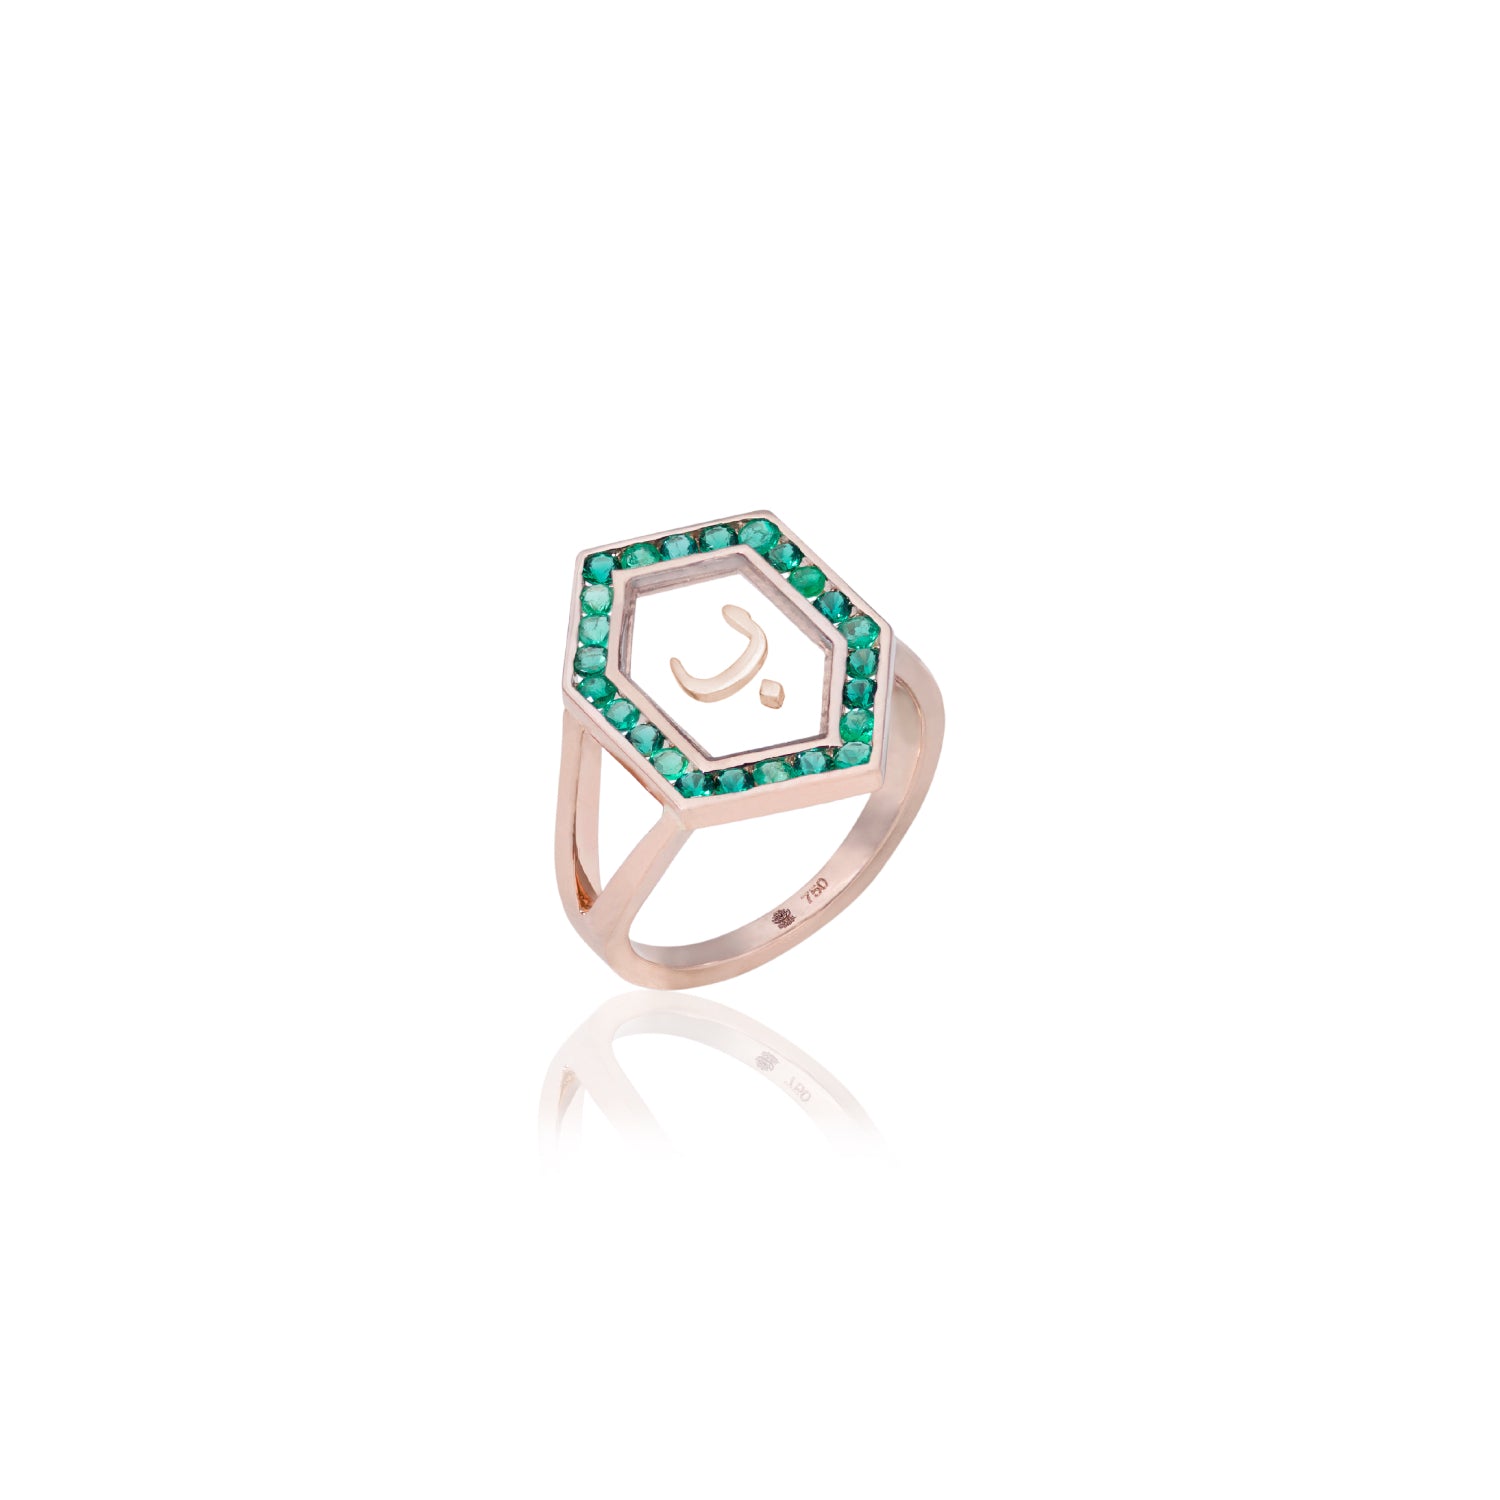 Qamoos 1.0 Letter ب Emerald Ring in Rose Gold